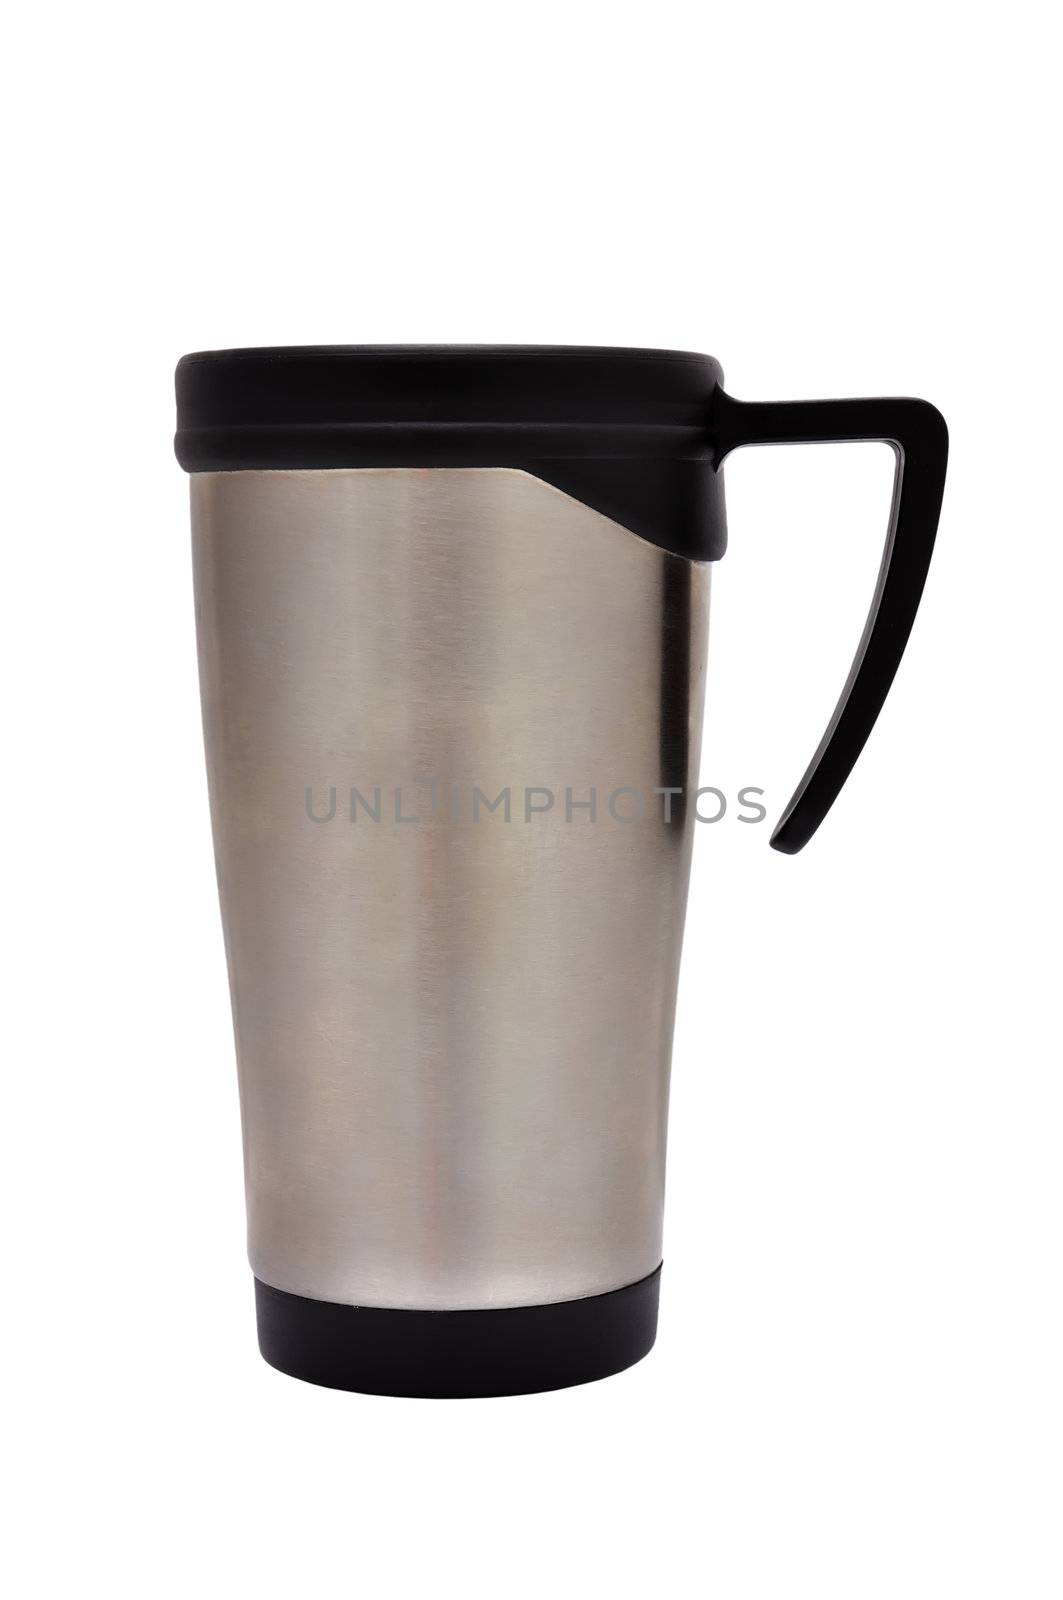 metal Thermo Cup on a white background